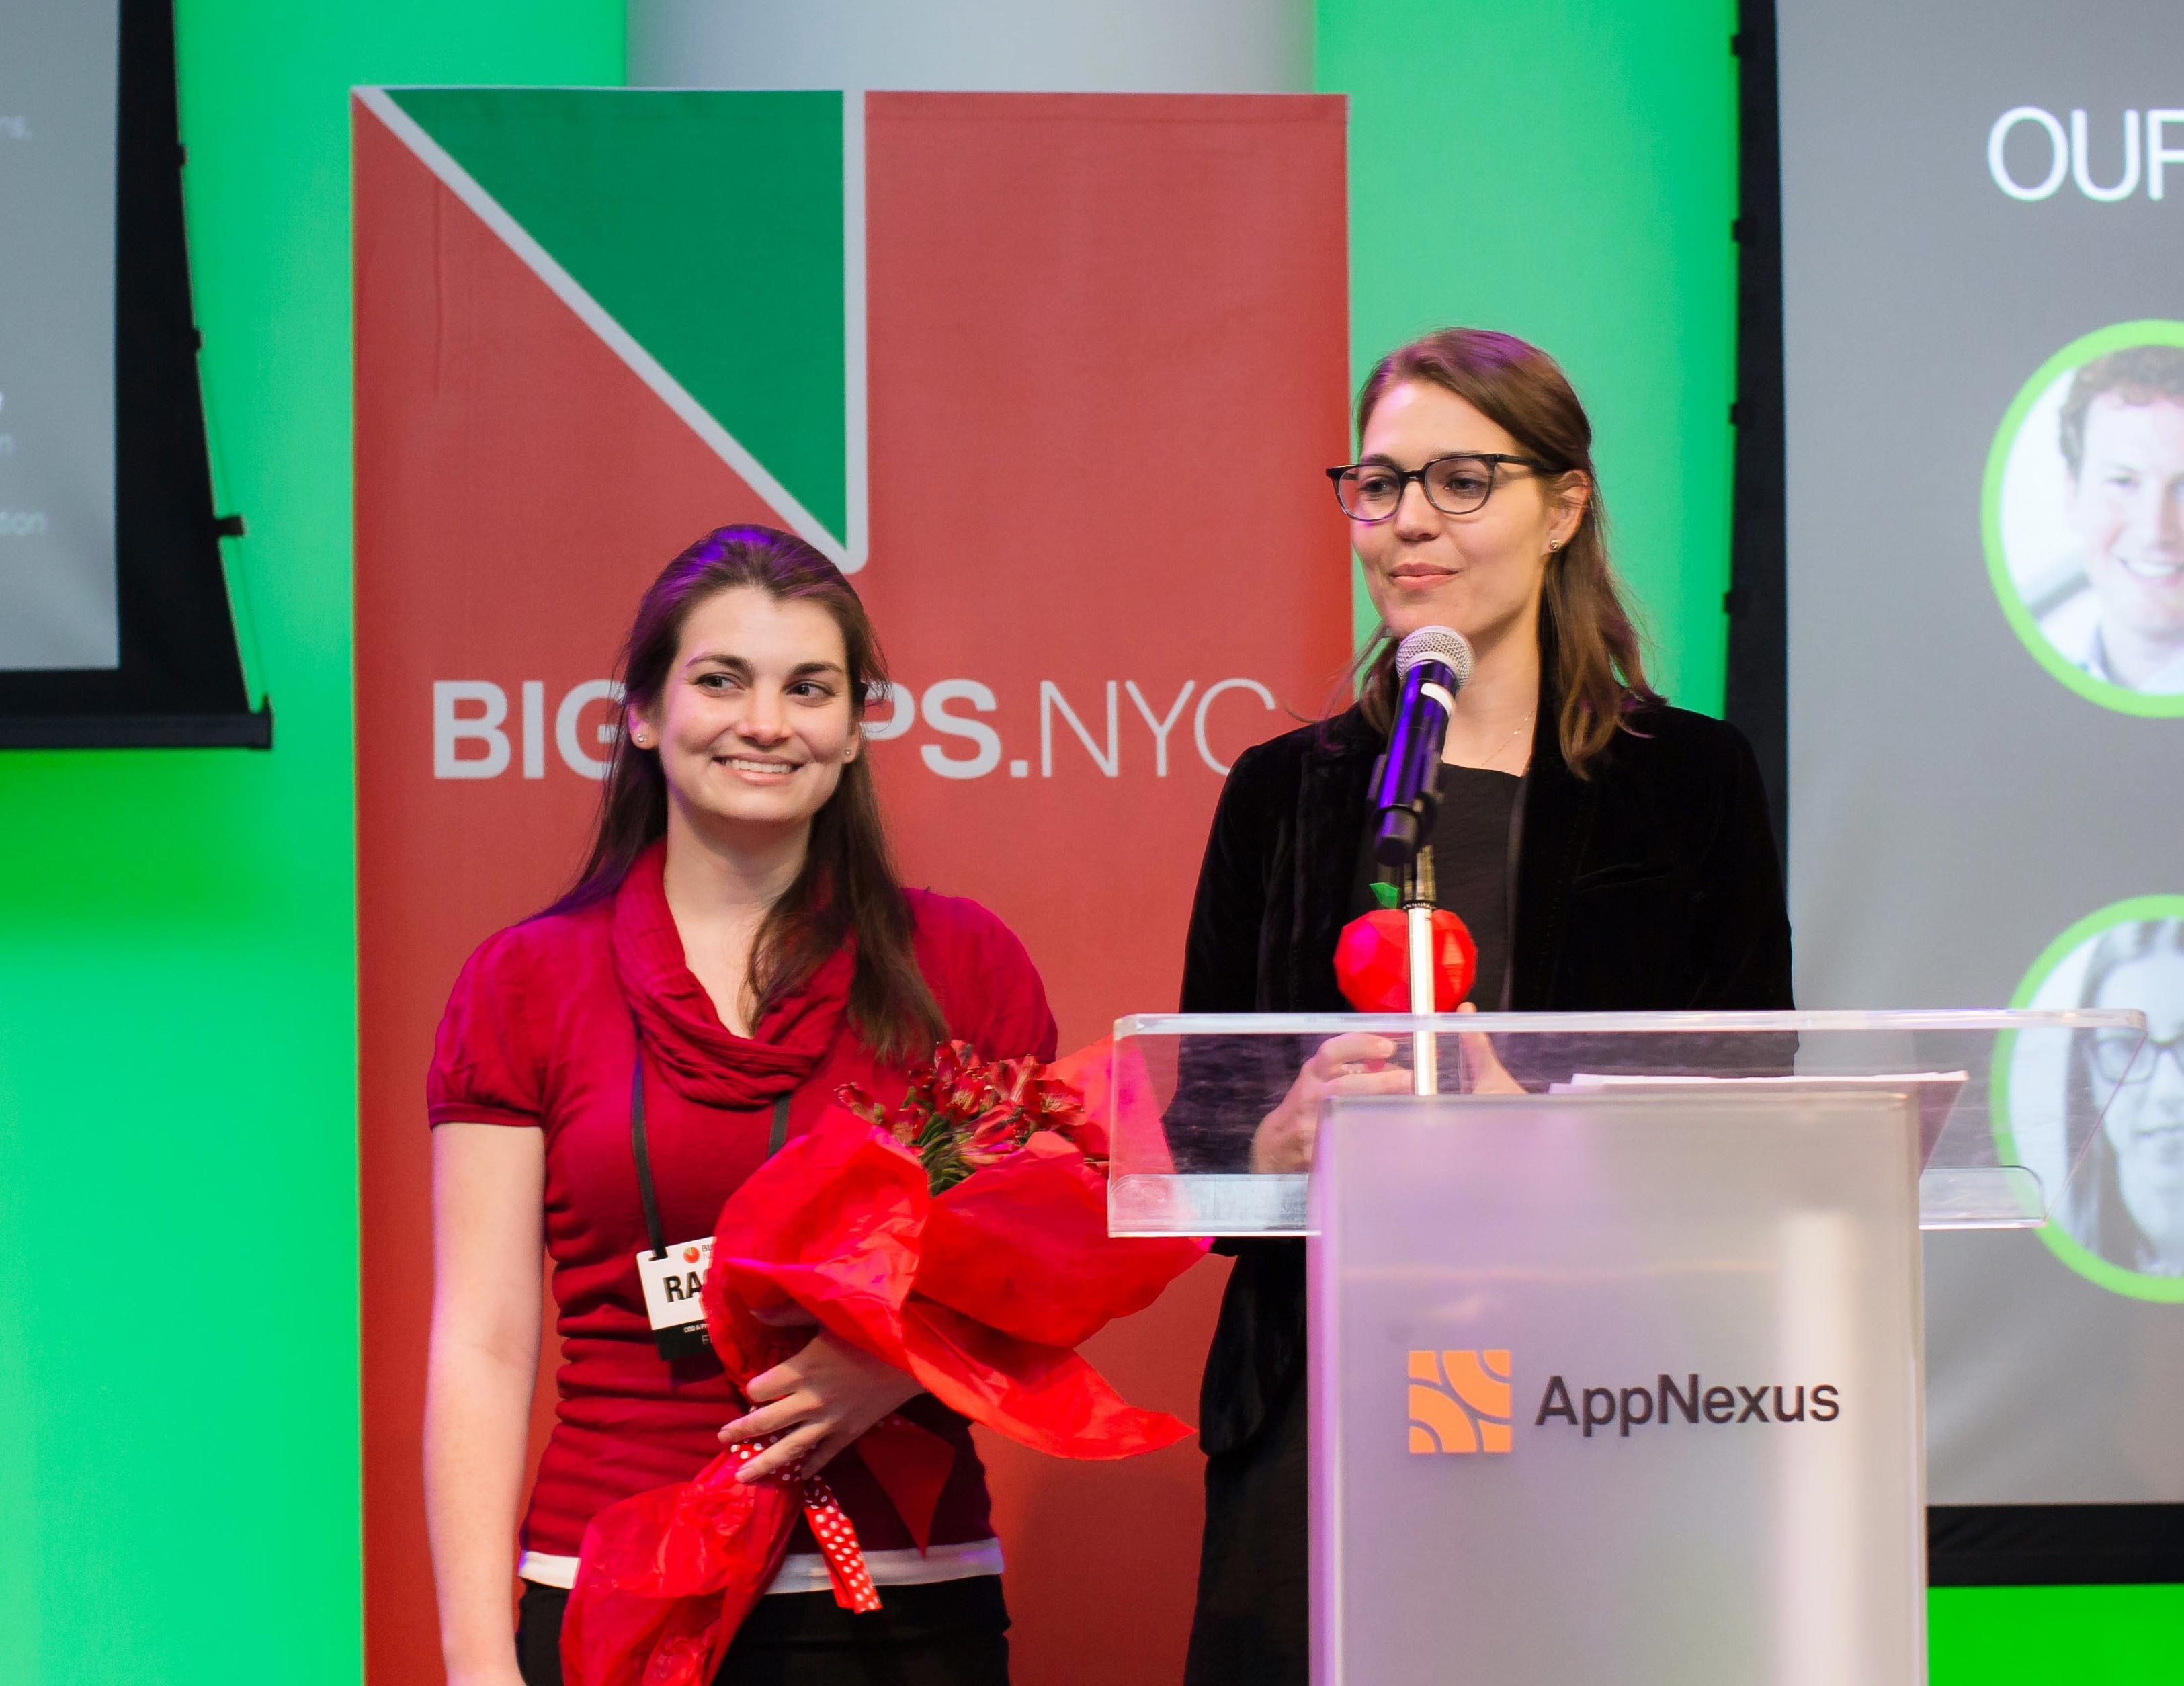 Nesterly cofounders Rachel Goor MCP ’17 and Noelle Marcus MCP ’17 winning the Community Resilience Prize at the NYC BigApps Grand Prize Winners Award Ceremony (5/23/17). Photo: Bekka Palmer